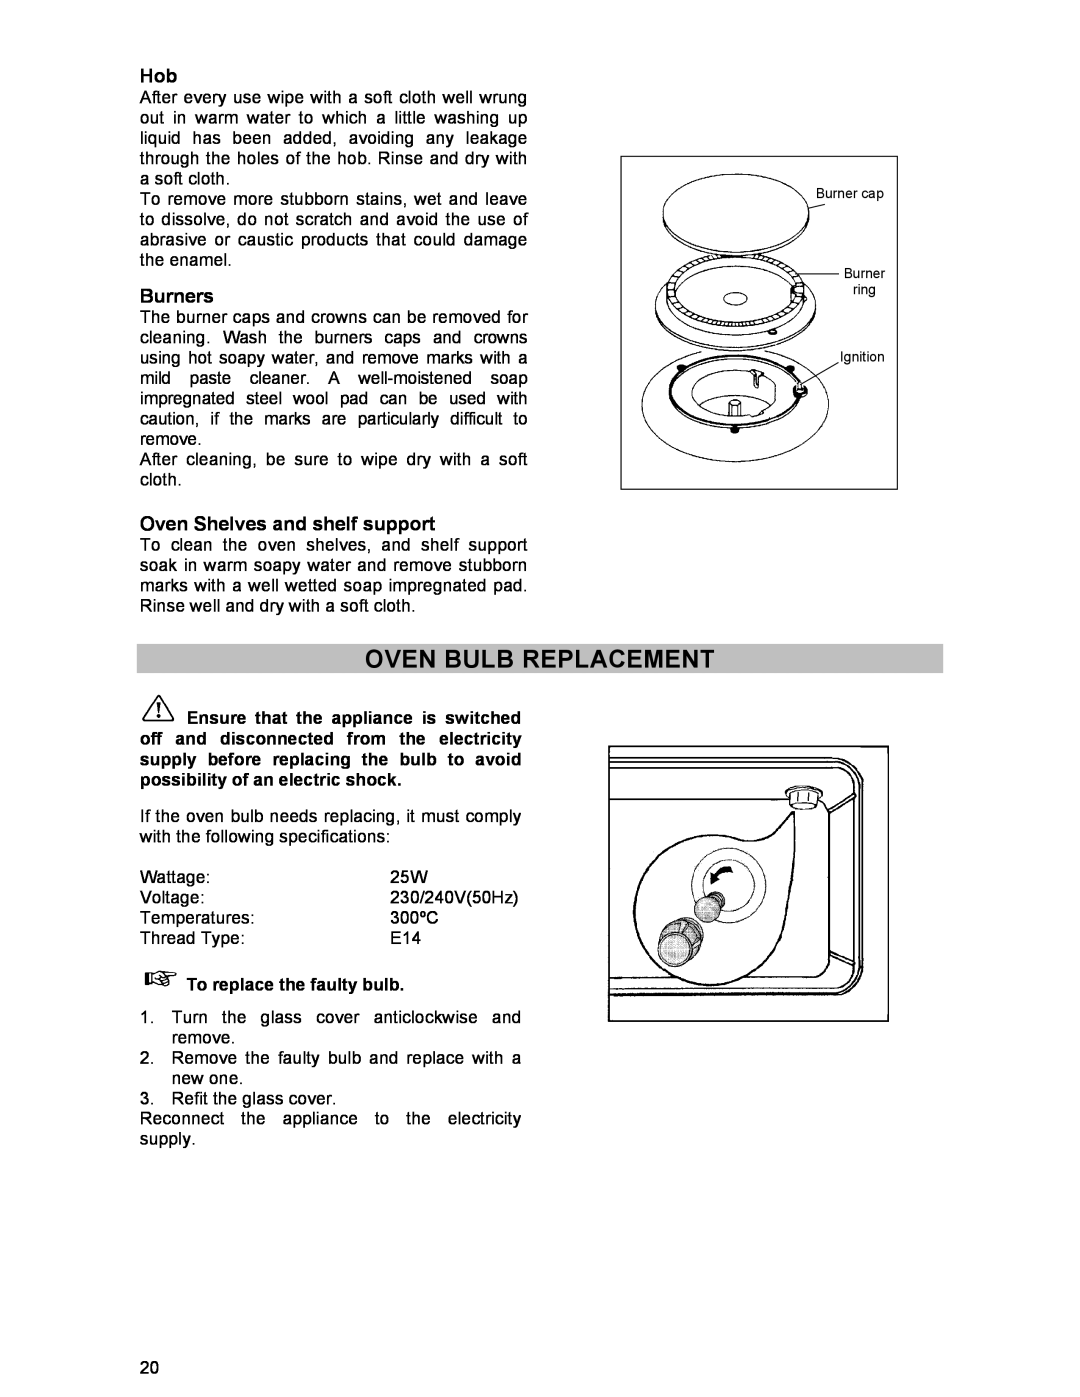 Electrolux DSO51DF manual Oven Bulb Replacement, Burners, Oven Shelves and shelf support, To replace the faulty bulb 